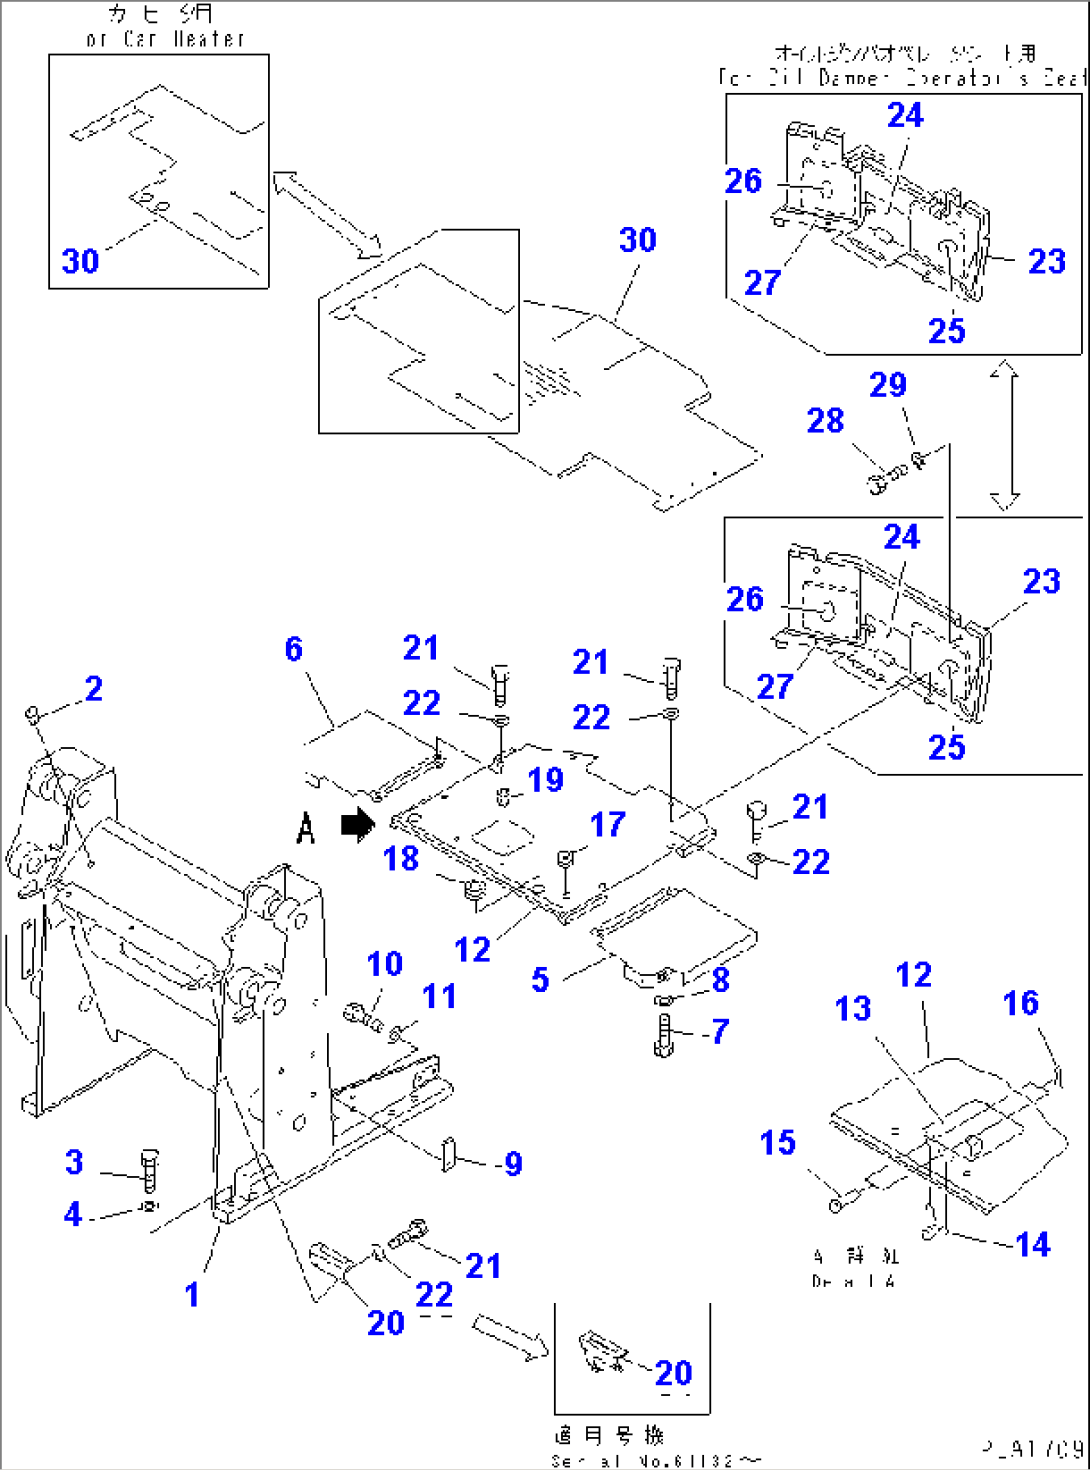 LOADER FRAME AND FLOOR PLATE (WITH ROPS CAB)